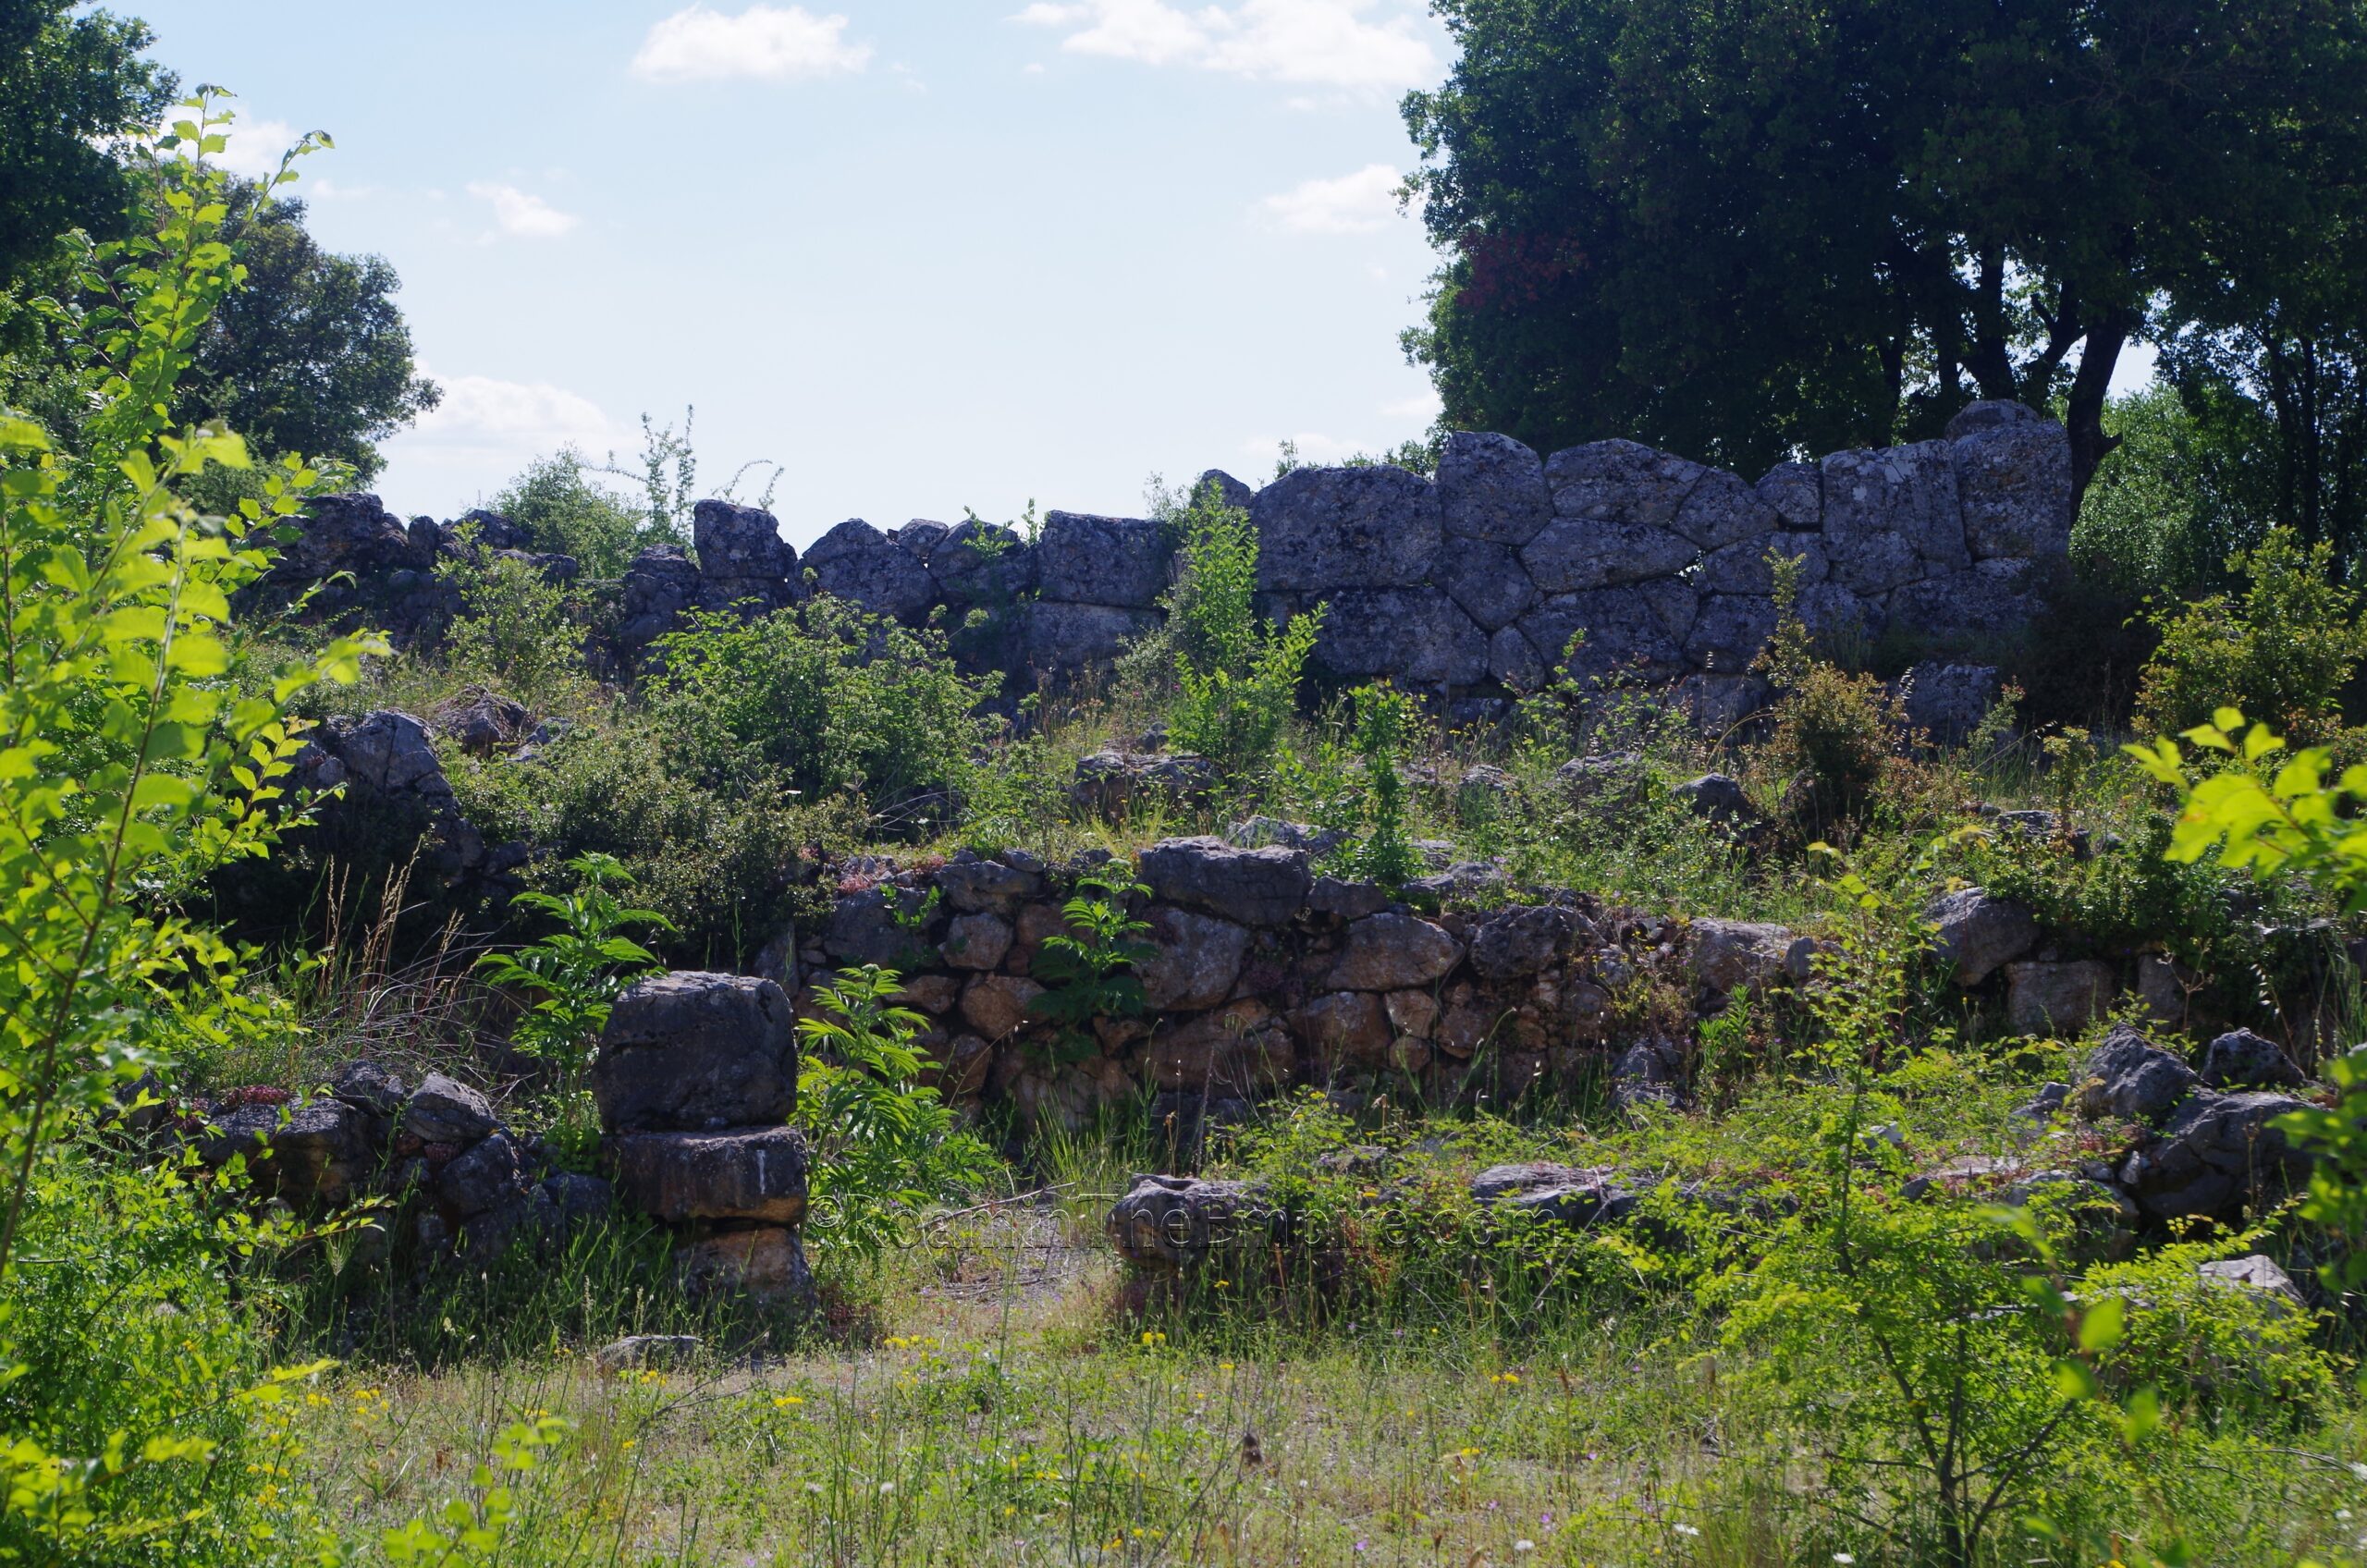 Fortification walls and remains of buildings near the second complex (Γ, ΣΤ, Z, H, Θ).